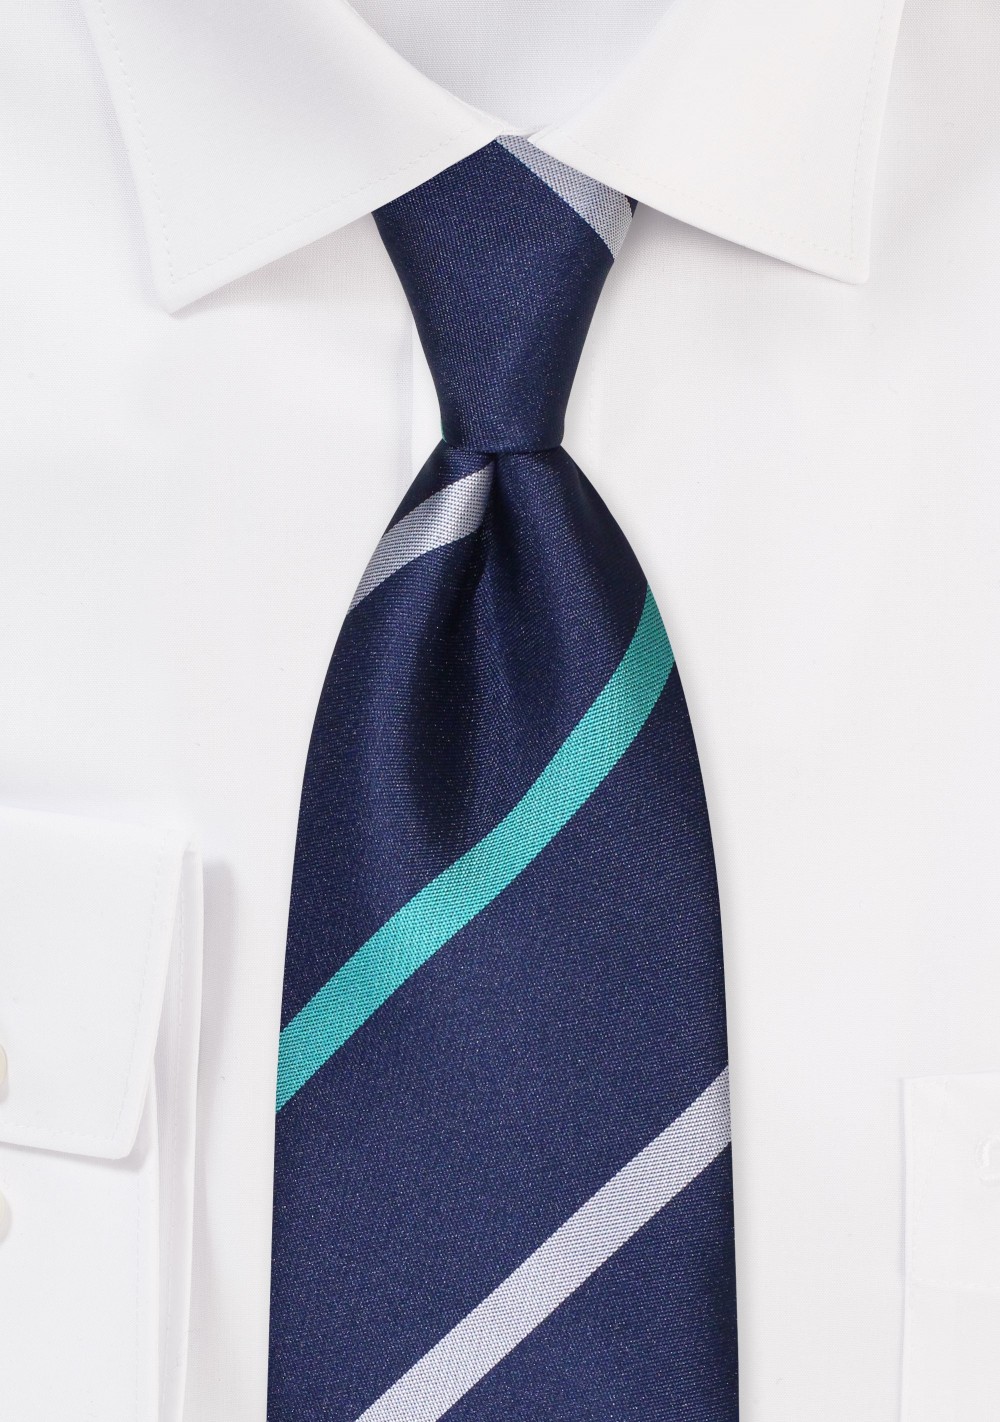 Modern Striped Tie in Navy, Silver, and Teal Green